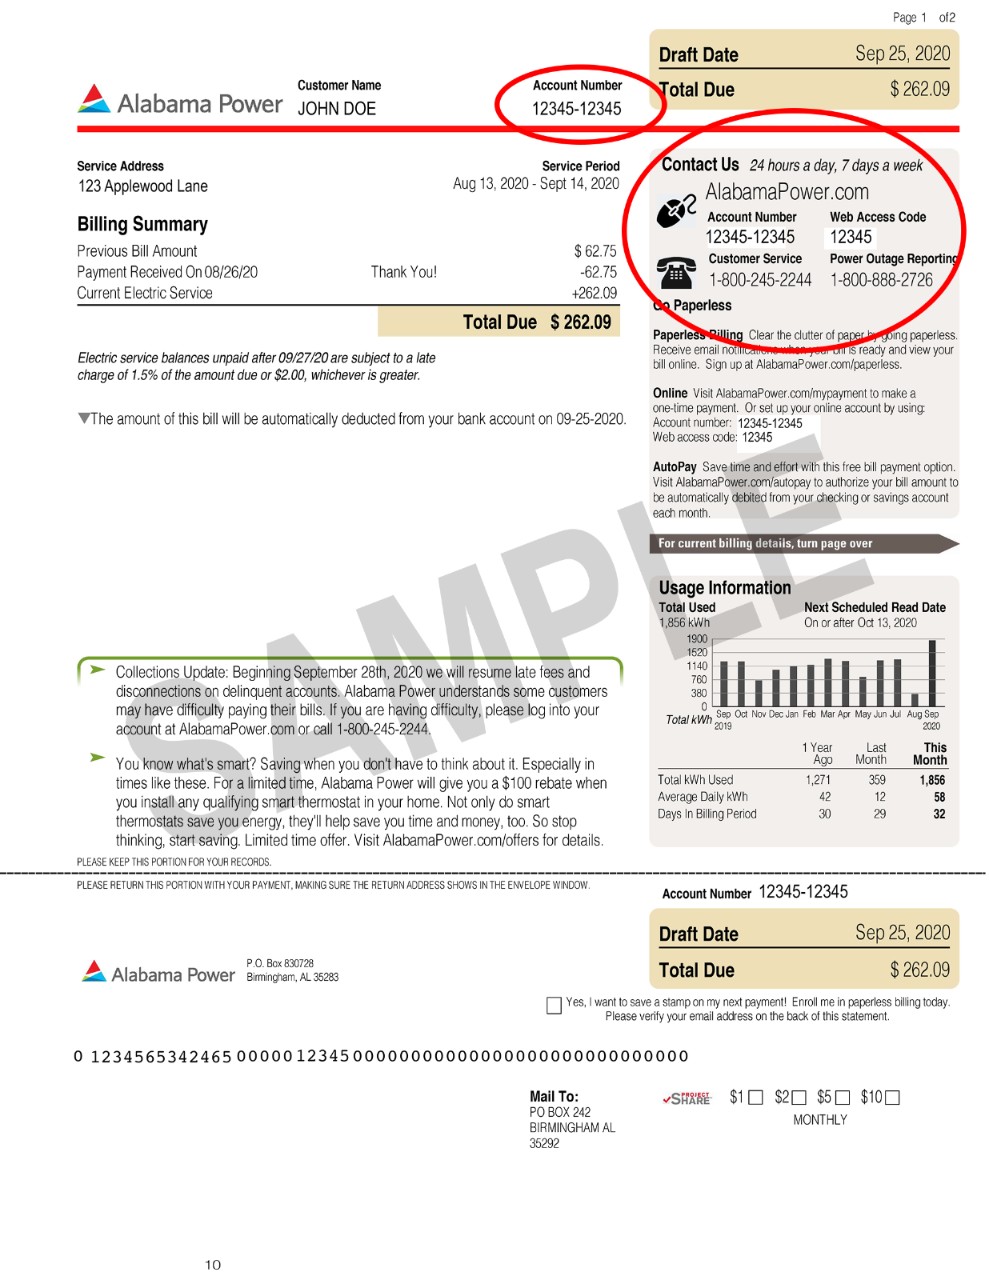 New Electricity Bill Format  - Account Number and Web Access Code - Alabama Power Company